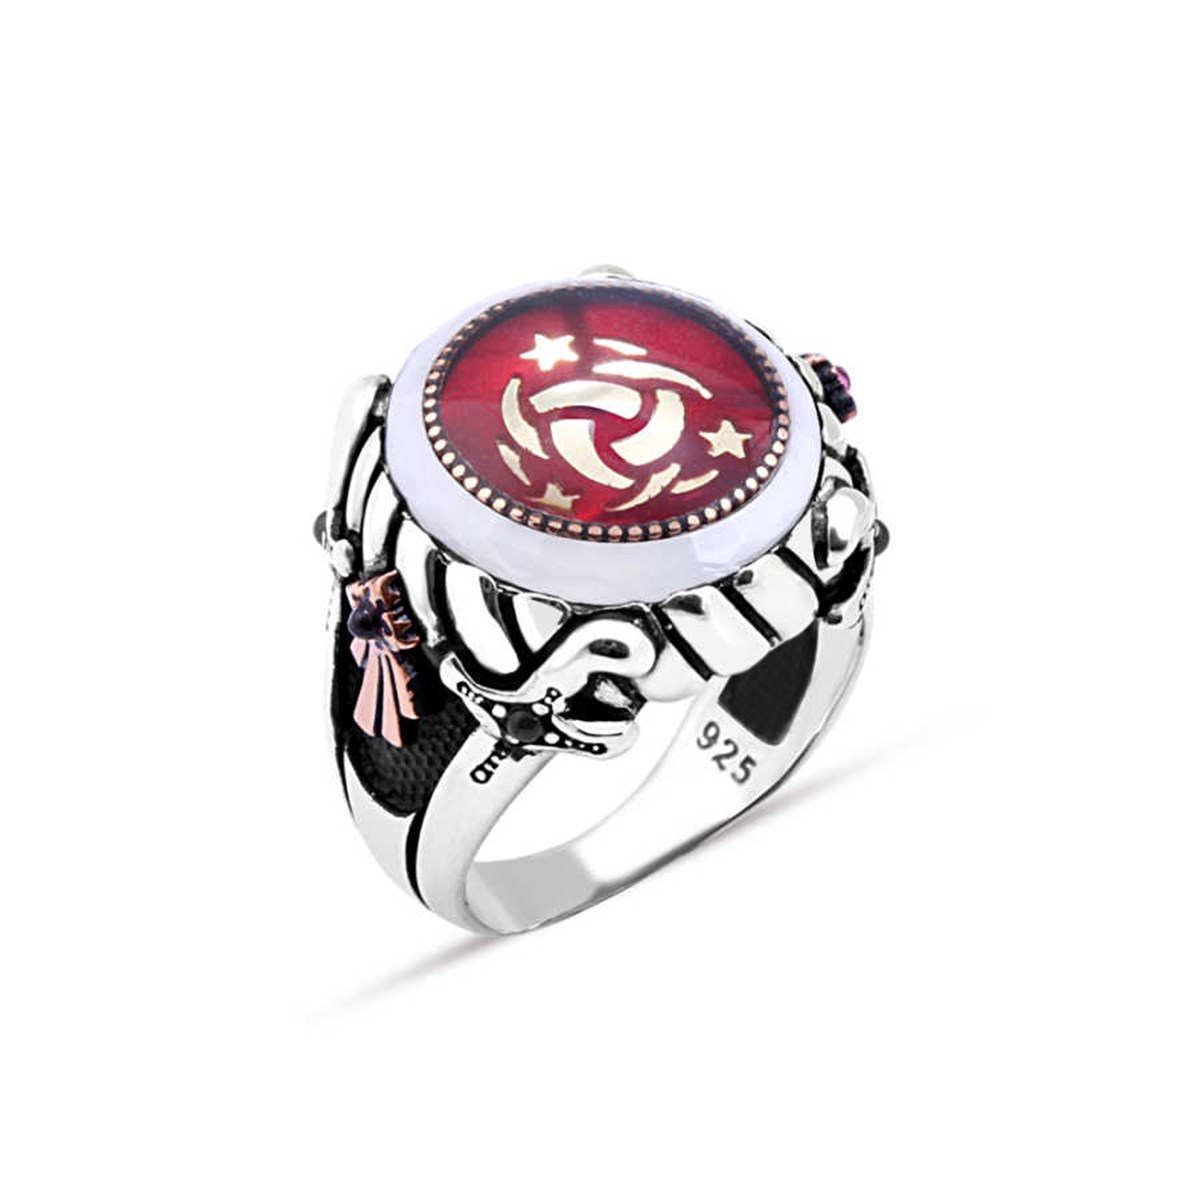 Enamel in the middle, Special Organization-I Special Edge Circle Stone Sterling Silver Men's Ring